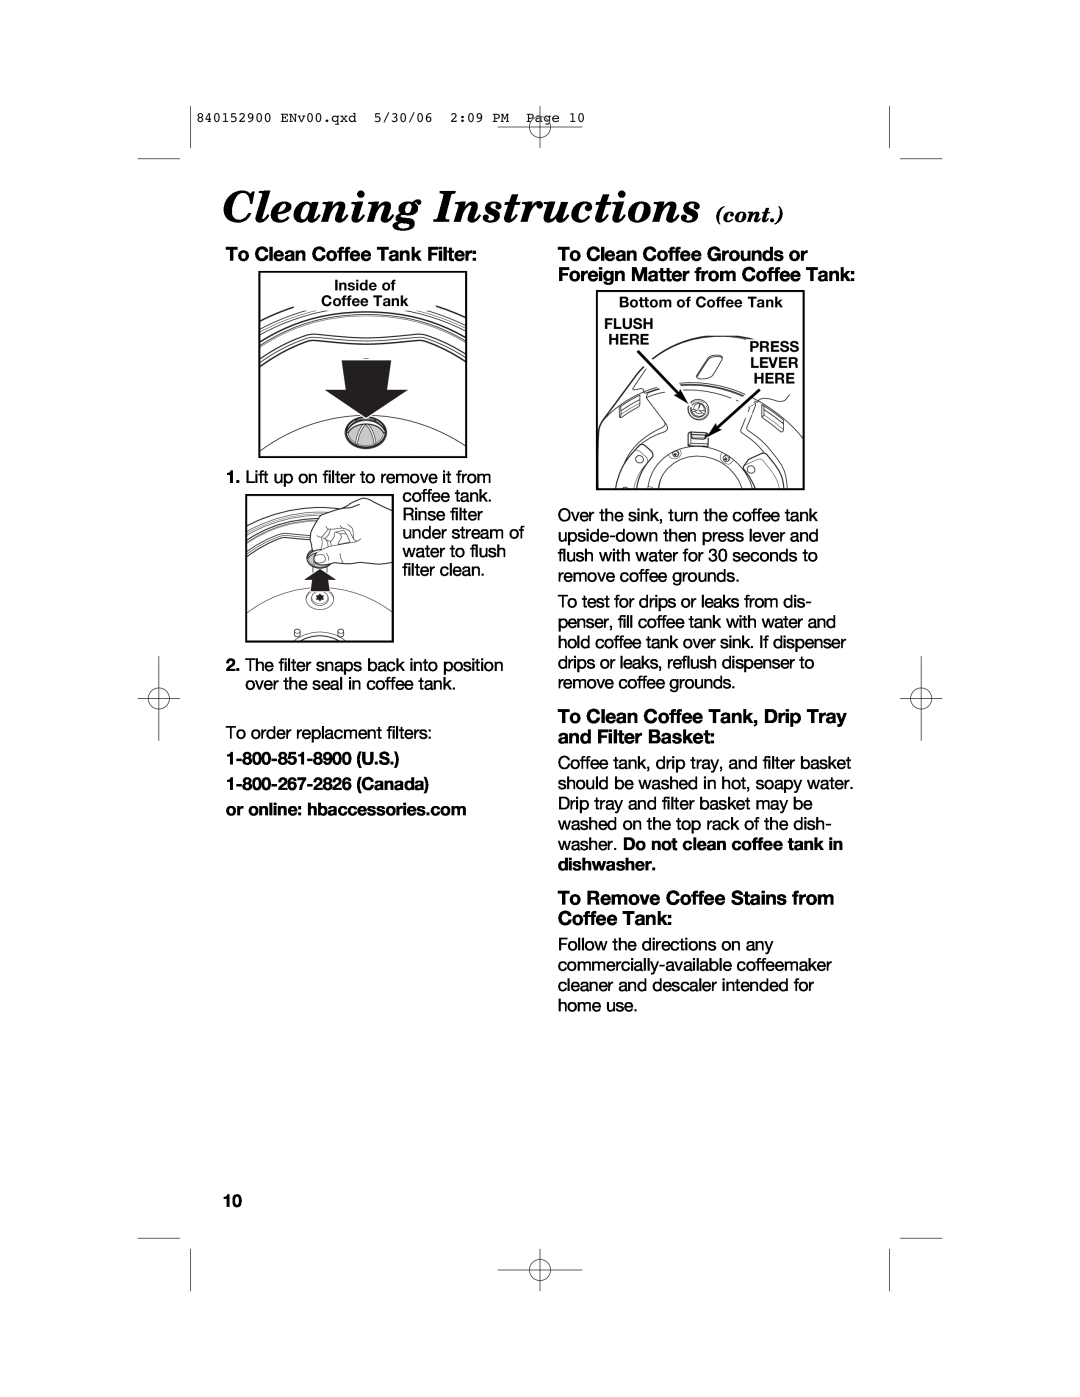 Hamilton Beach 47535C Cleaning Instructions cont, To Clean Coffee Tank Filter, To Remove Coffee Stains from Coffee Tank 